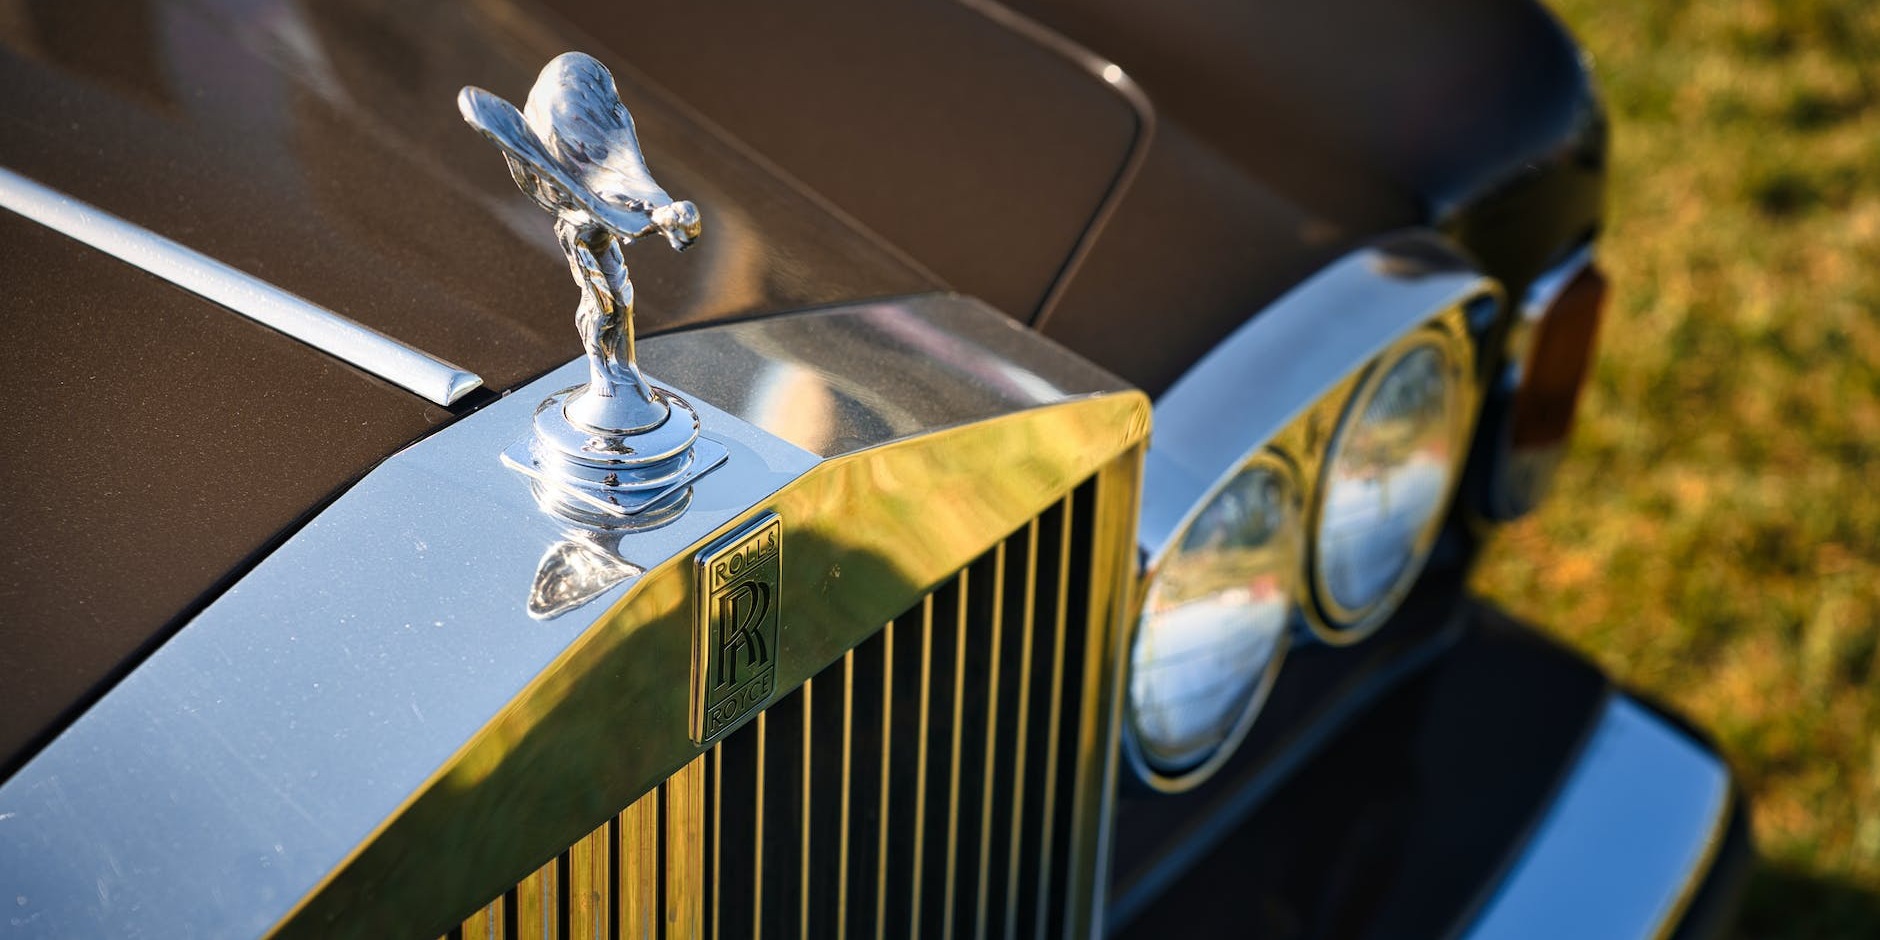 Why Choose a Rolls Royce for Your Central London Wedding Day Transport?